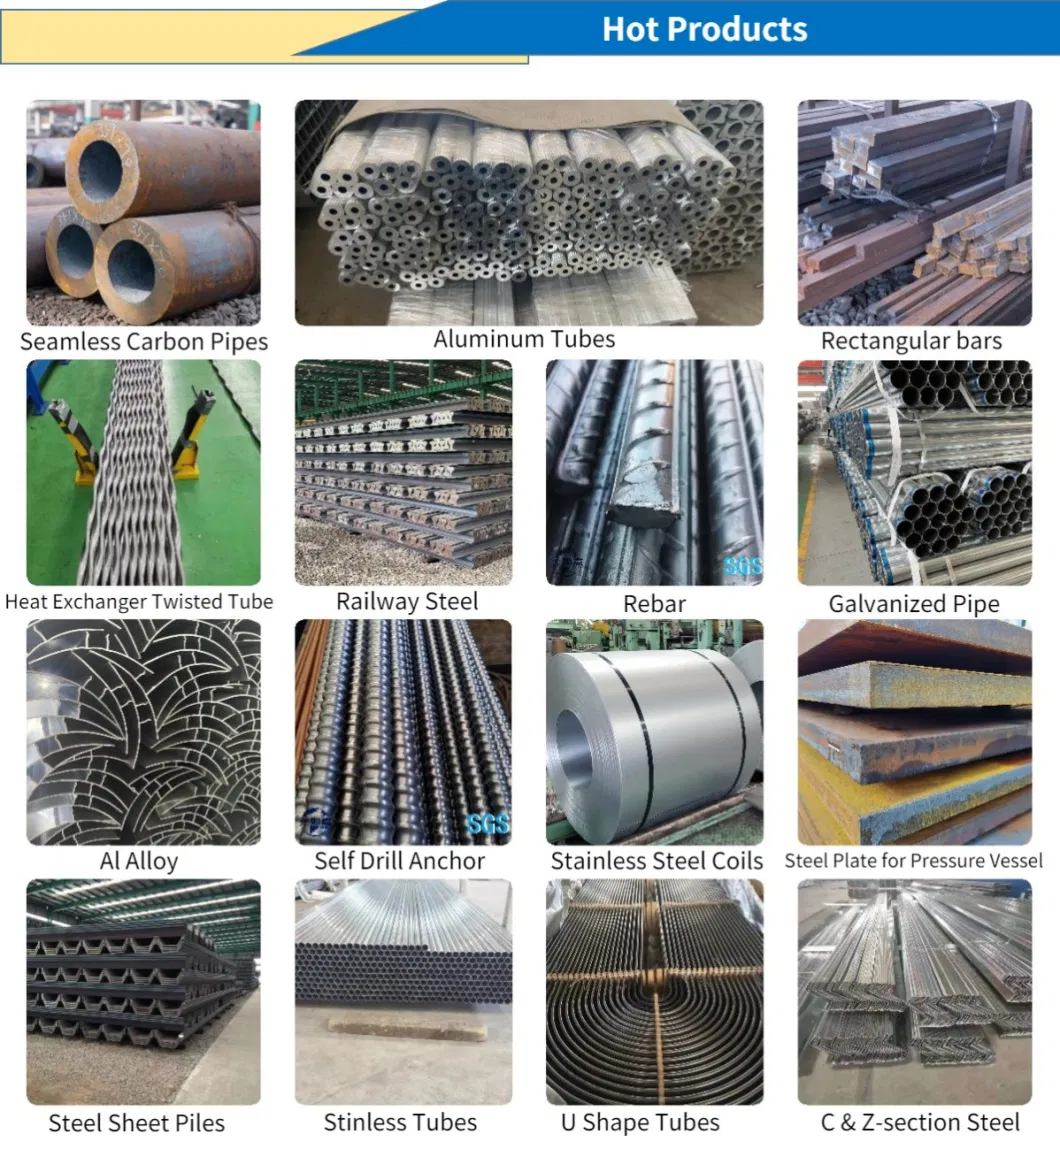 ASTM D2 JIS SKD11 DIN 1.2379/X153crmo12 Cold Work Tool Steel Hot Rolled Forged Steel Round Bar